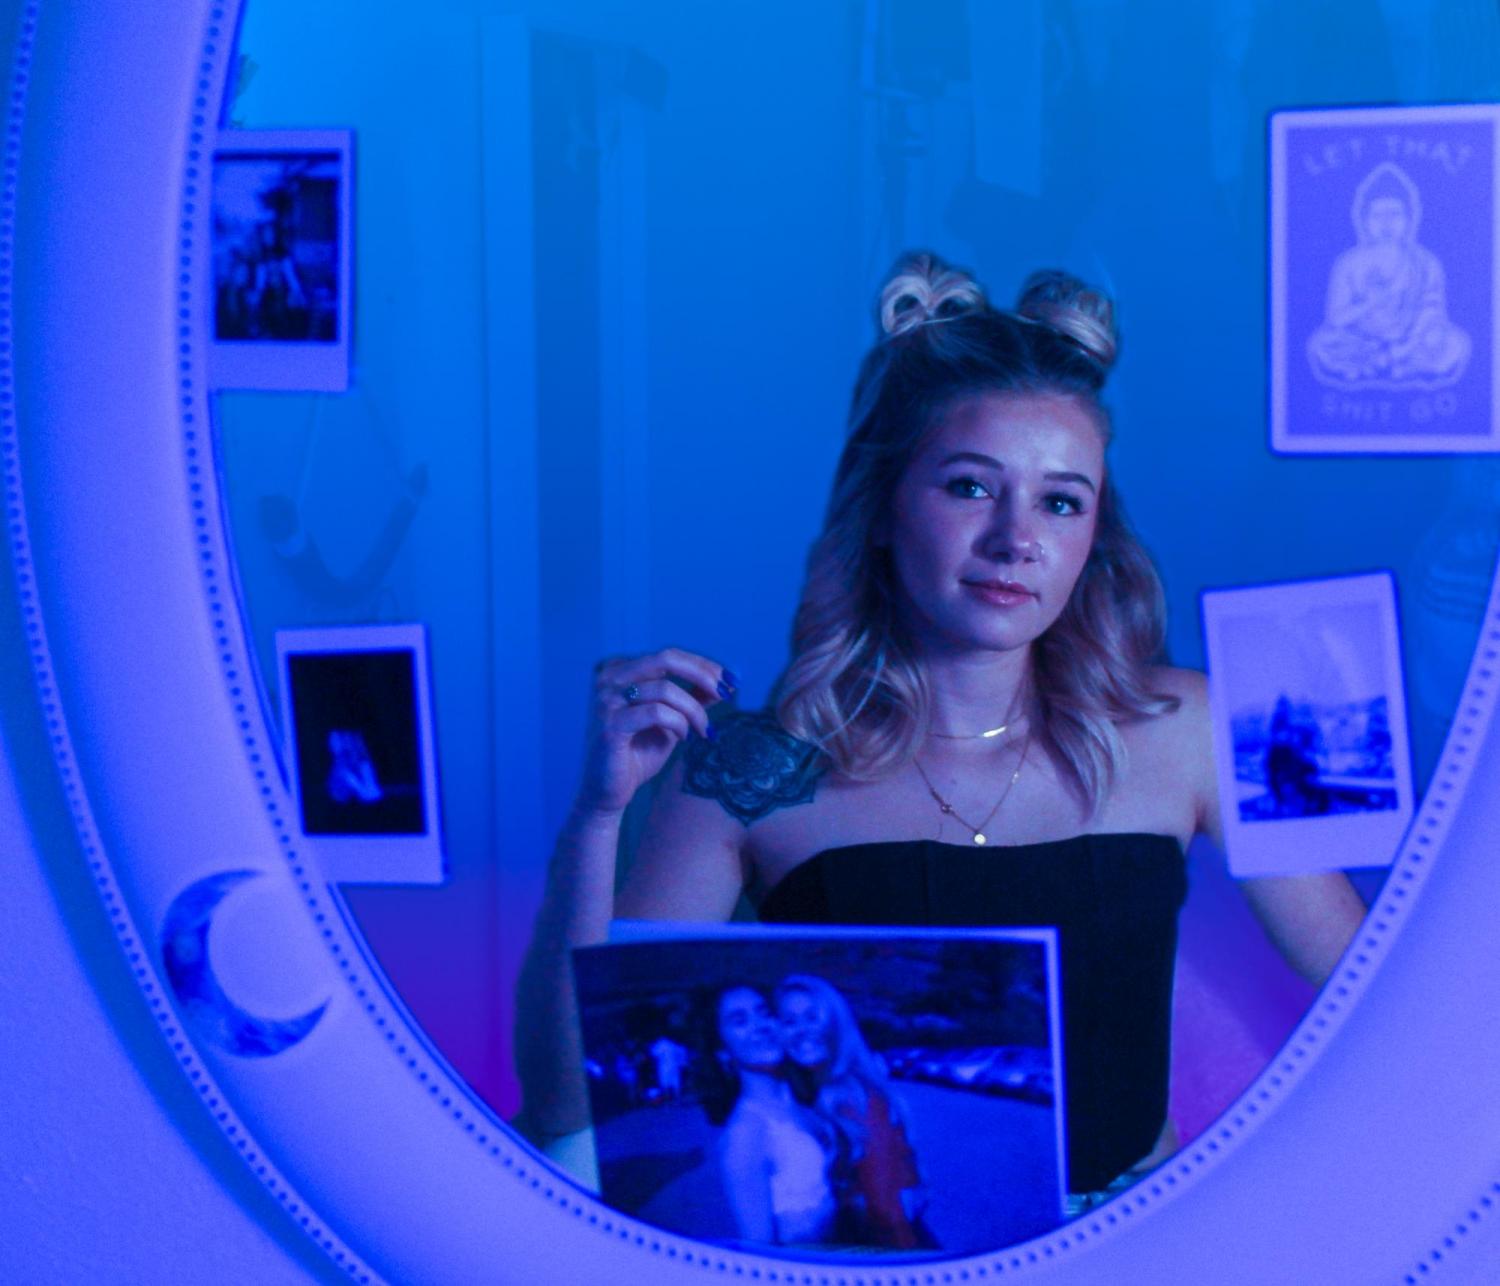 Woman in a blue room, looking into mirror and smiling